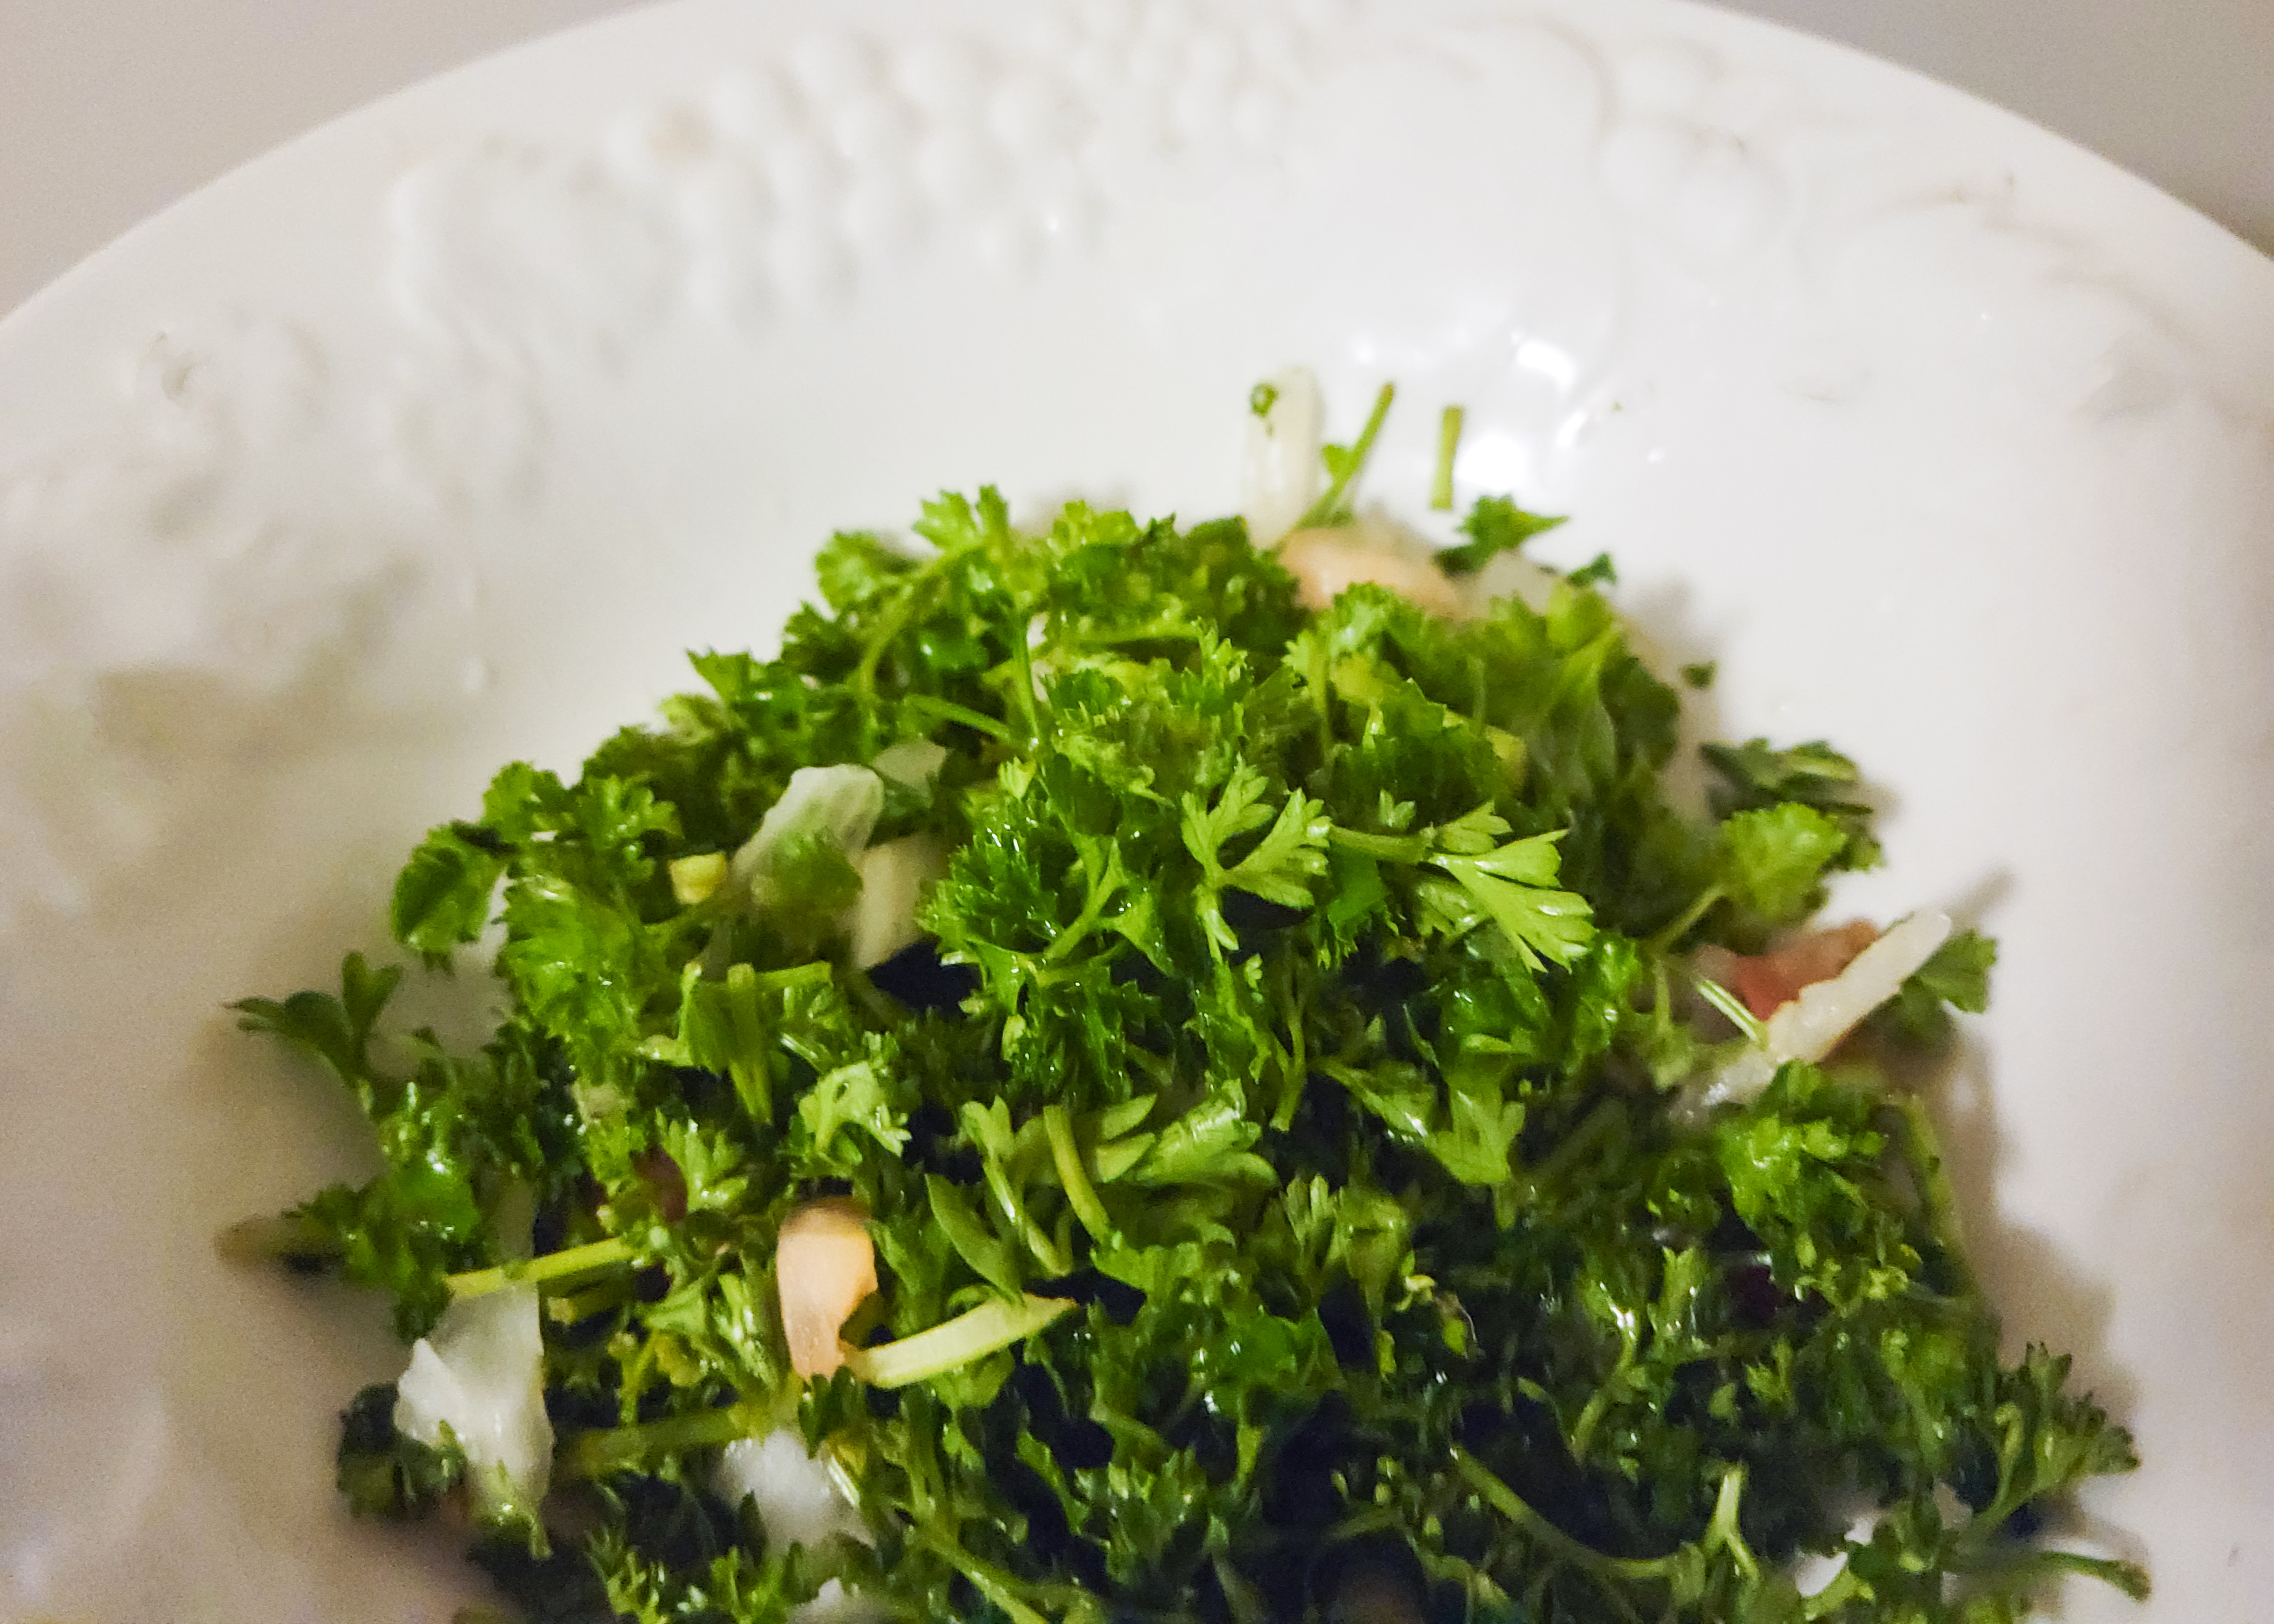 A plate of tabbouleh.